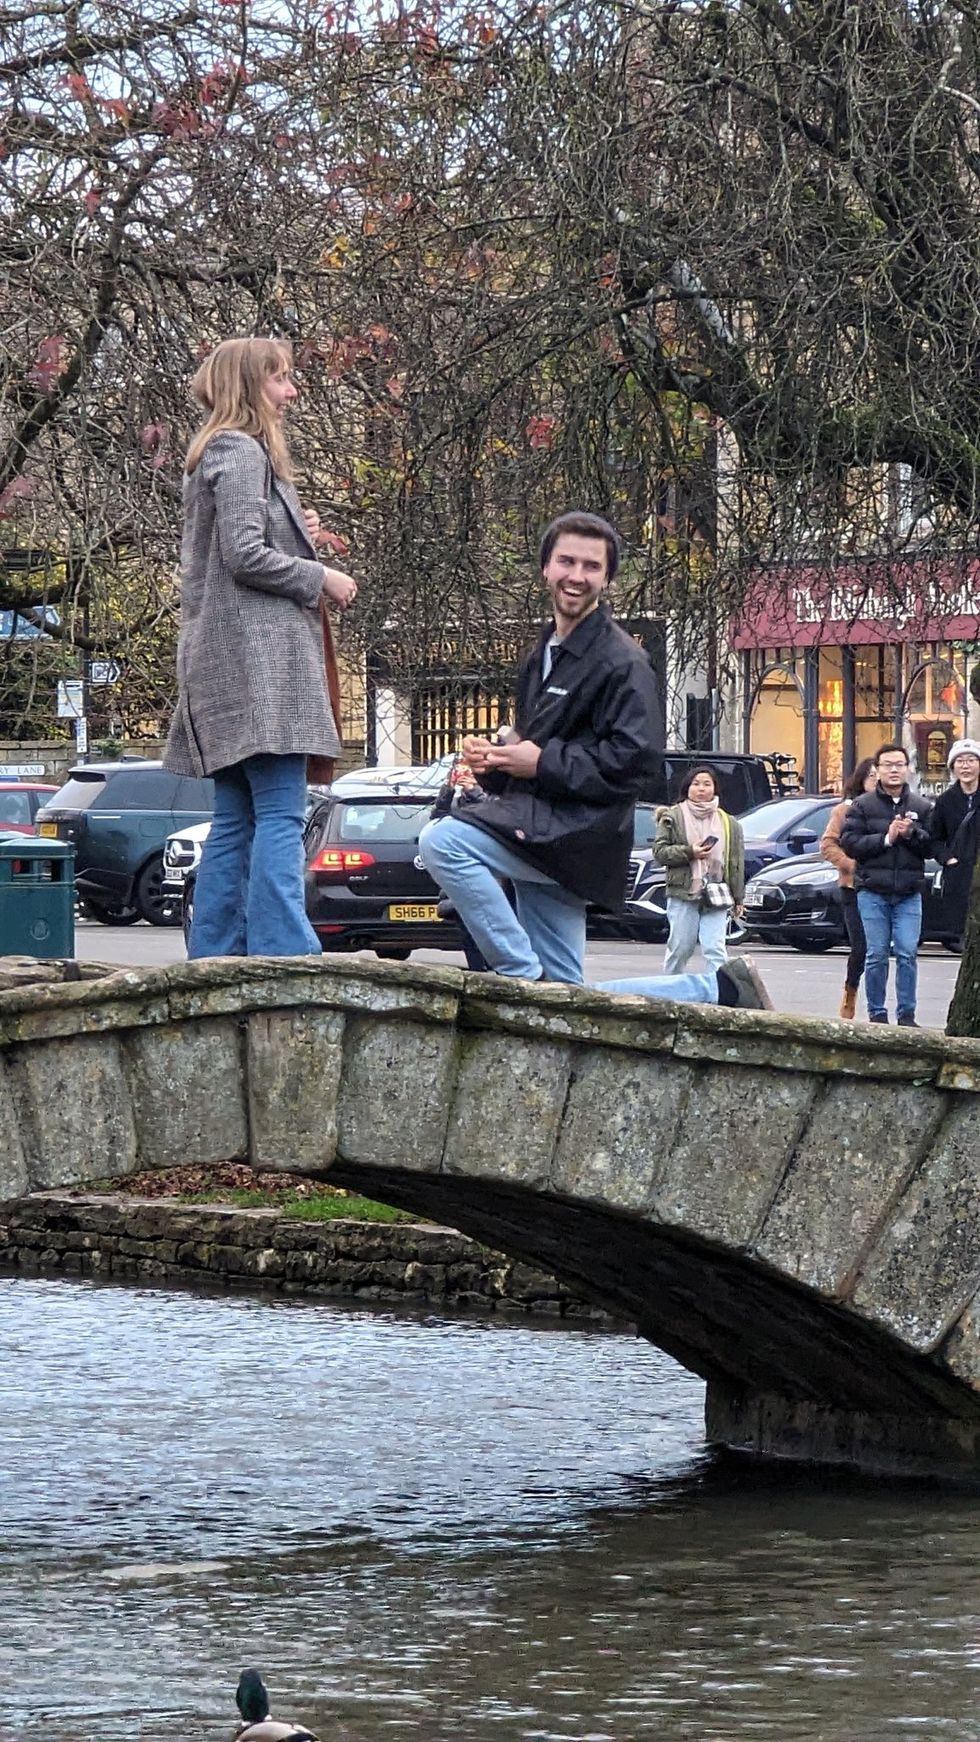 Couple ‘shocked’ after proposal photos go viral in hunt on X